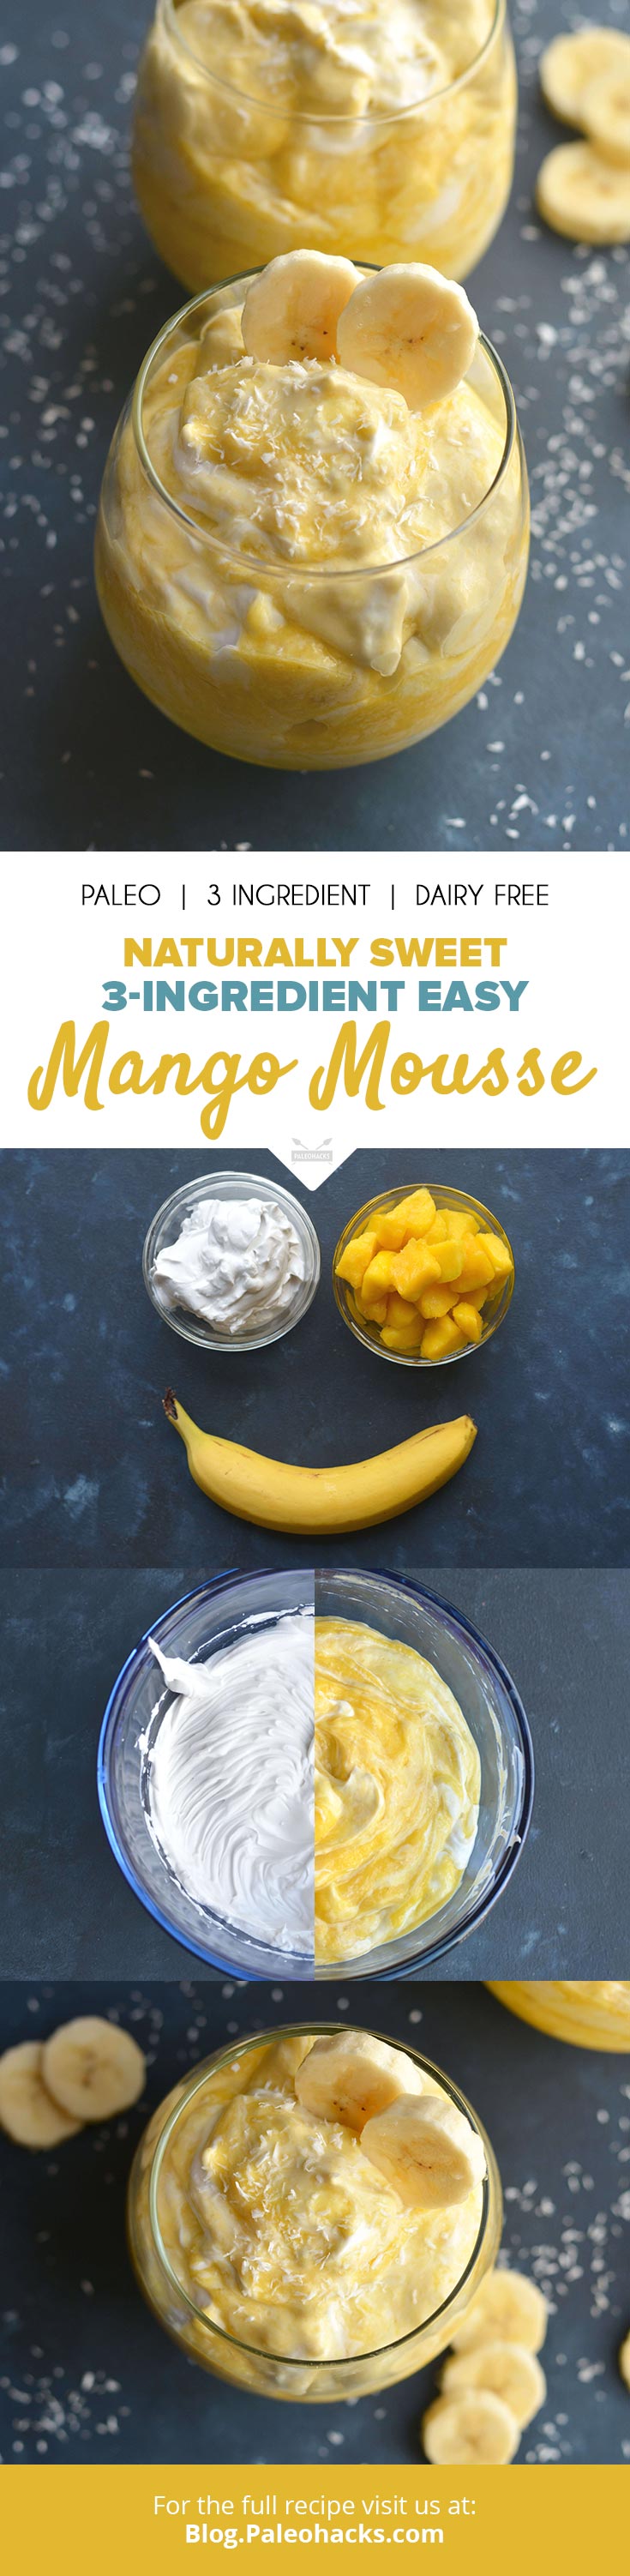 Blend up this light and fluffy mango mousse for a tropical treat you can enjoy year-round! All you need is chilled mango, a banana and coconut cream.